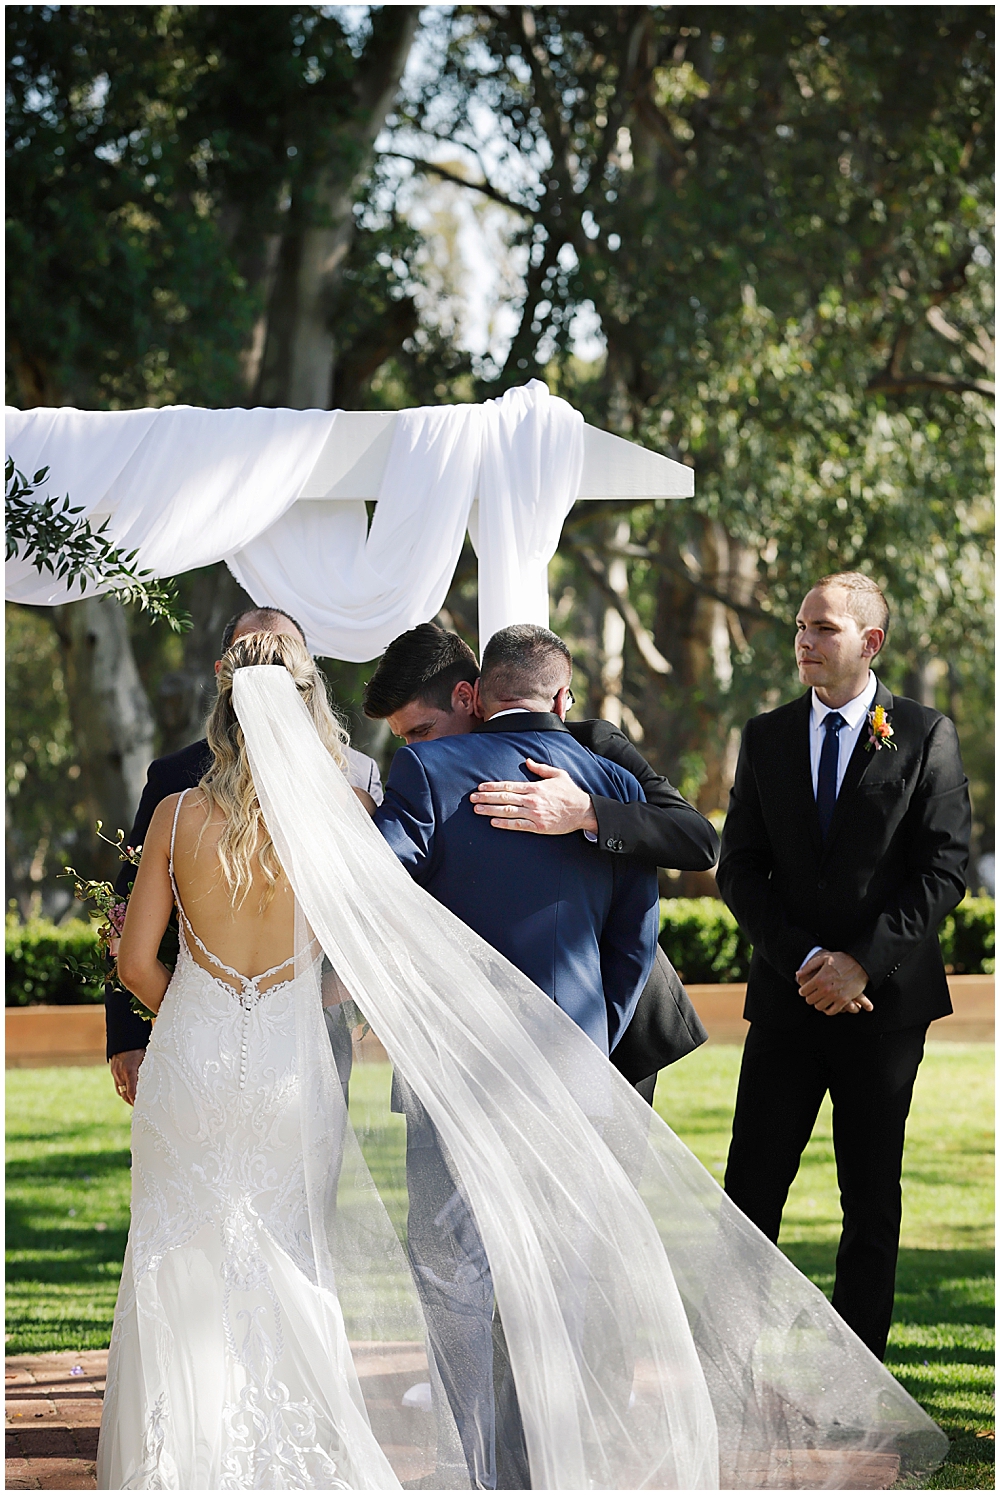 Perth Wedding Photographer at Mandoon Estate in the Swan Valley Perth